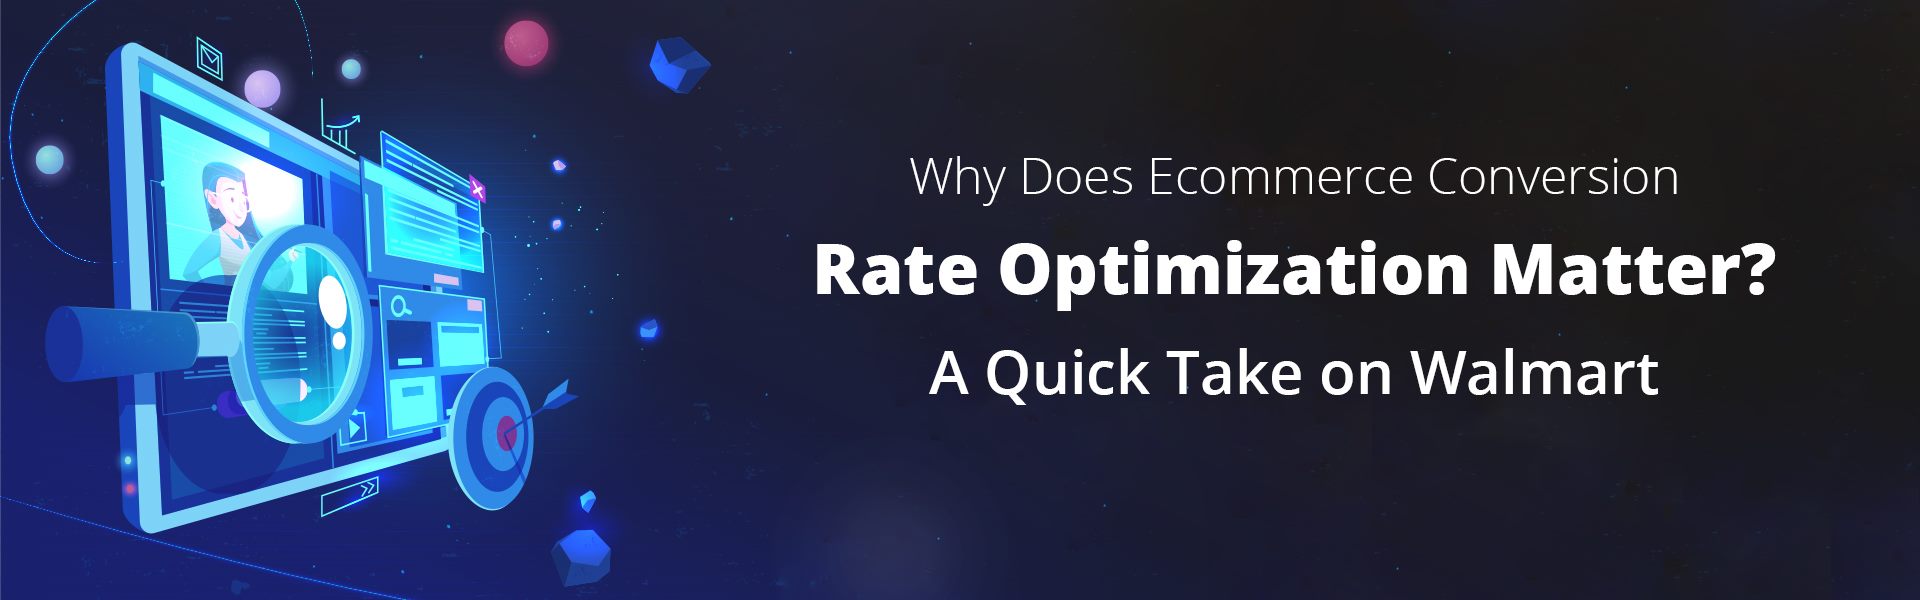 Why does ecommerce conversion rate optimization matter?